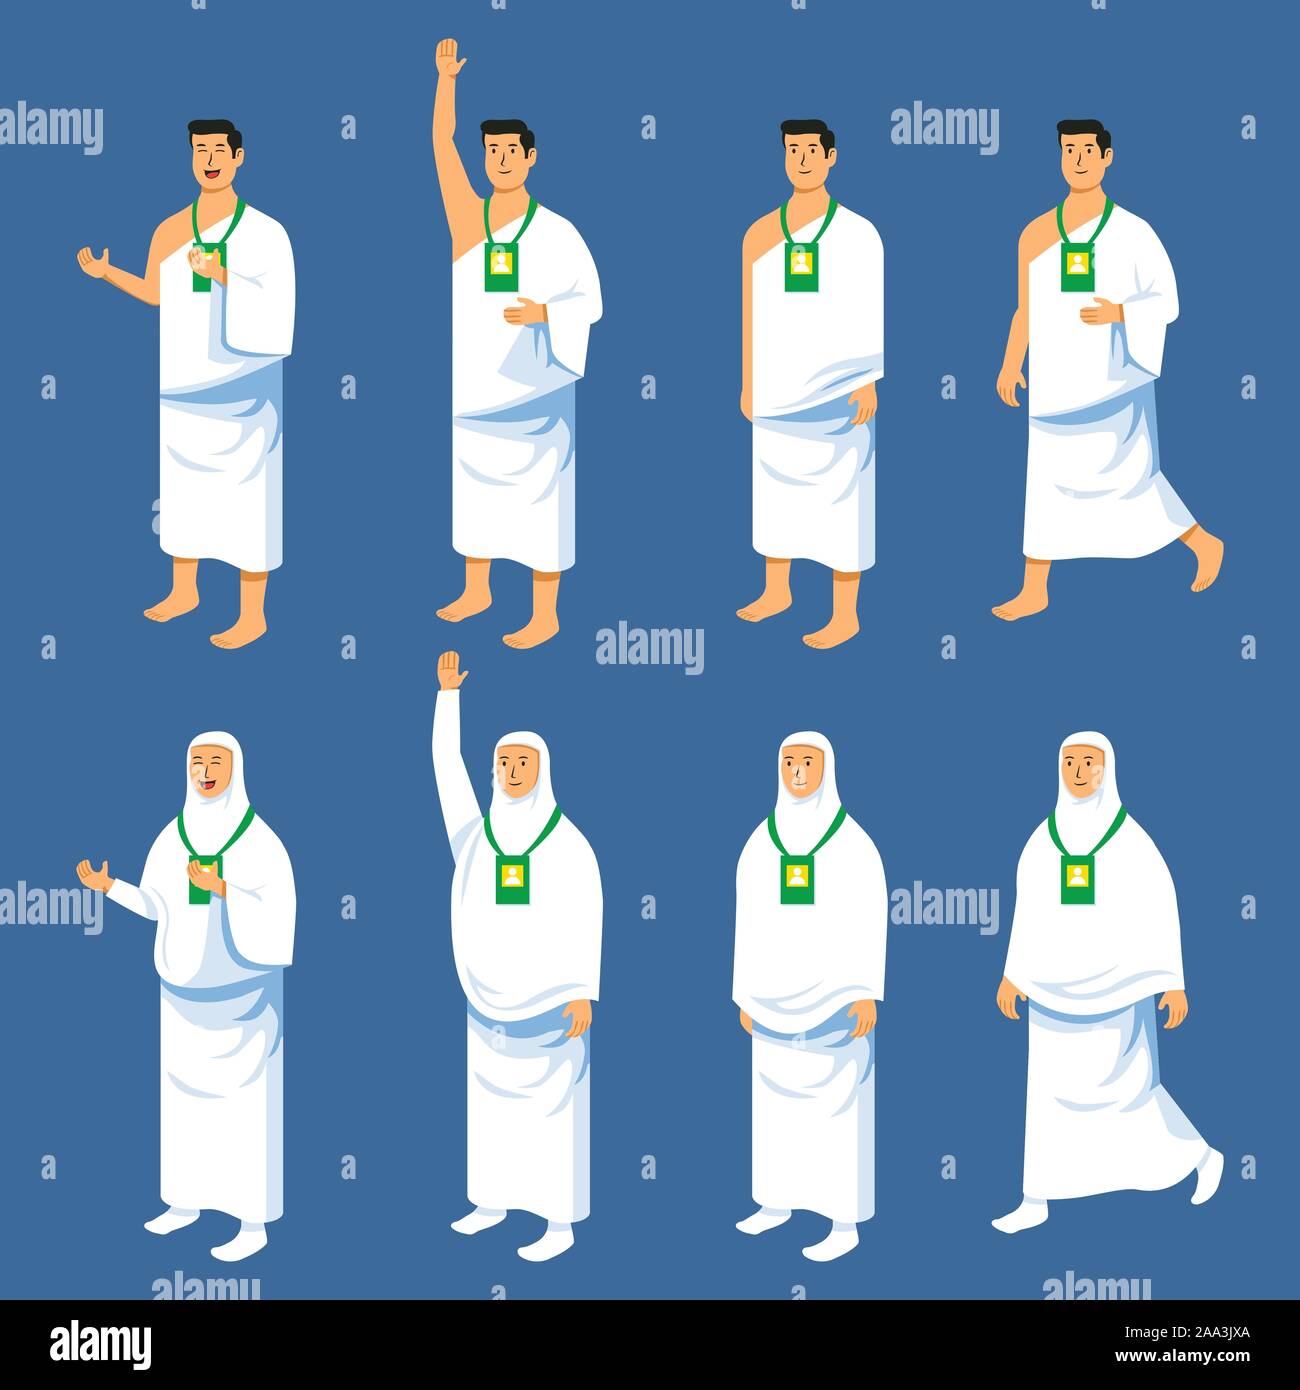 Set couples character of hajj pilgrimage. Suitable for infographic. Stock Vector